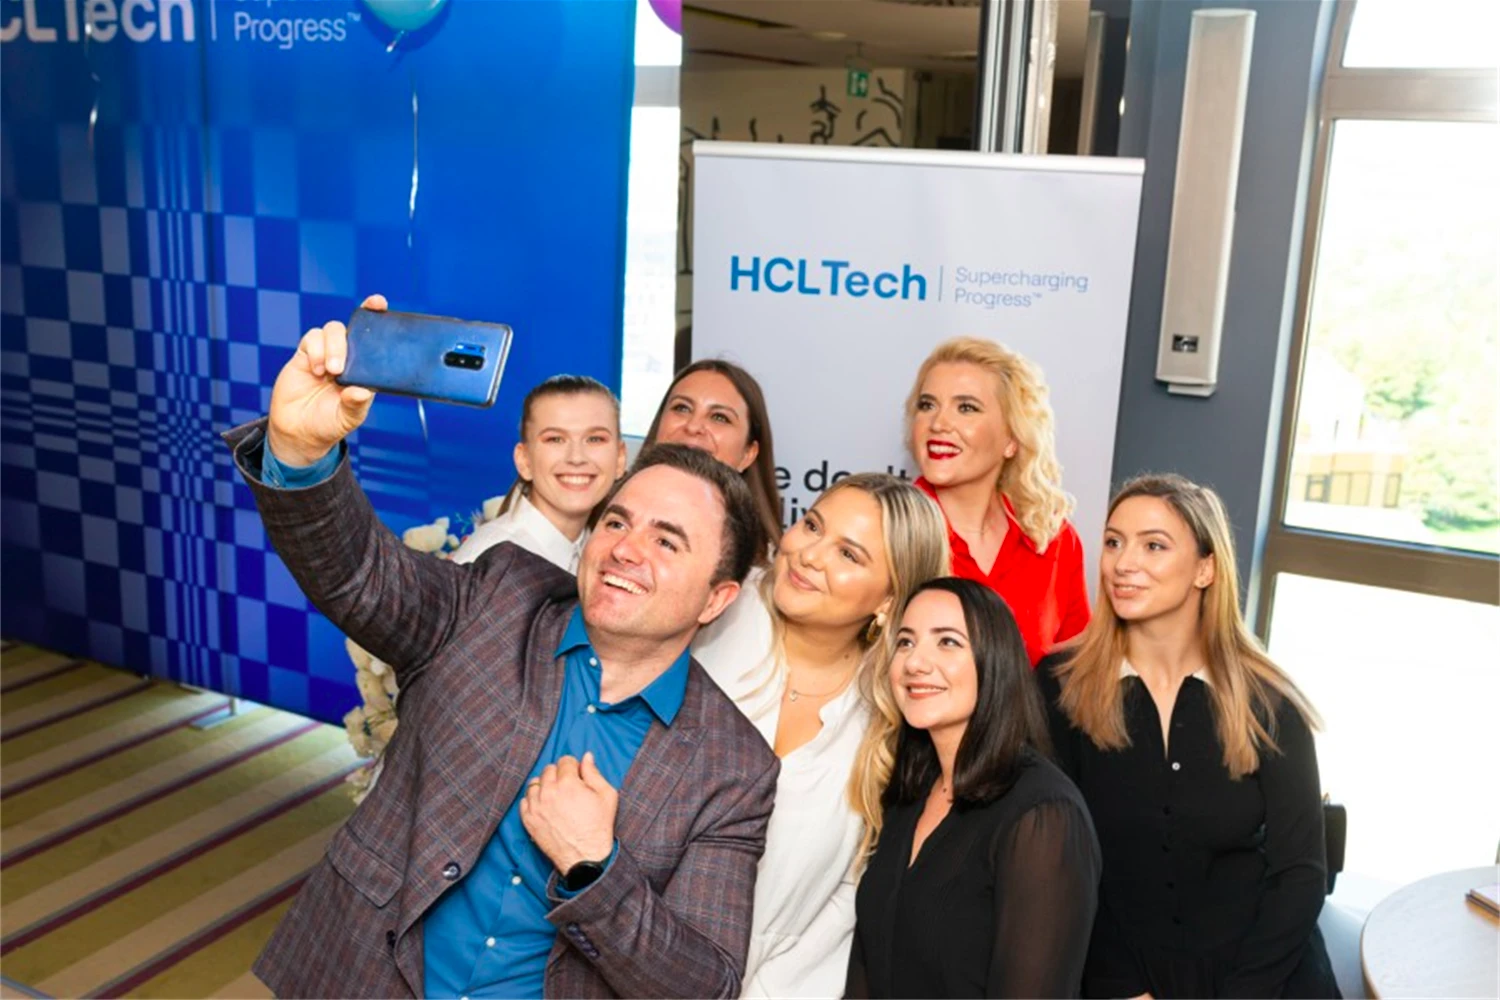 Celebration of HCLTech brand transformation in Iasi